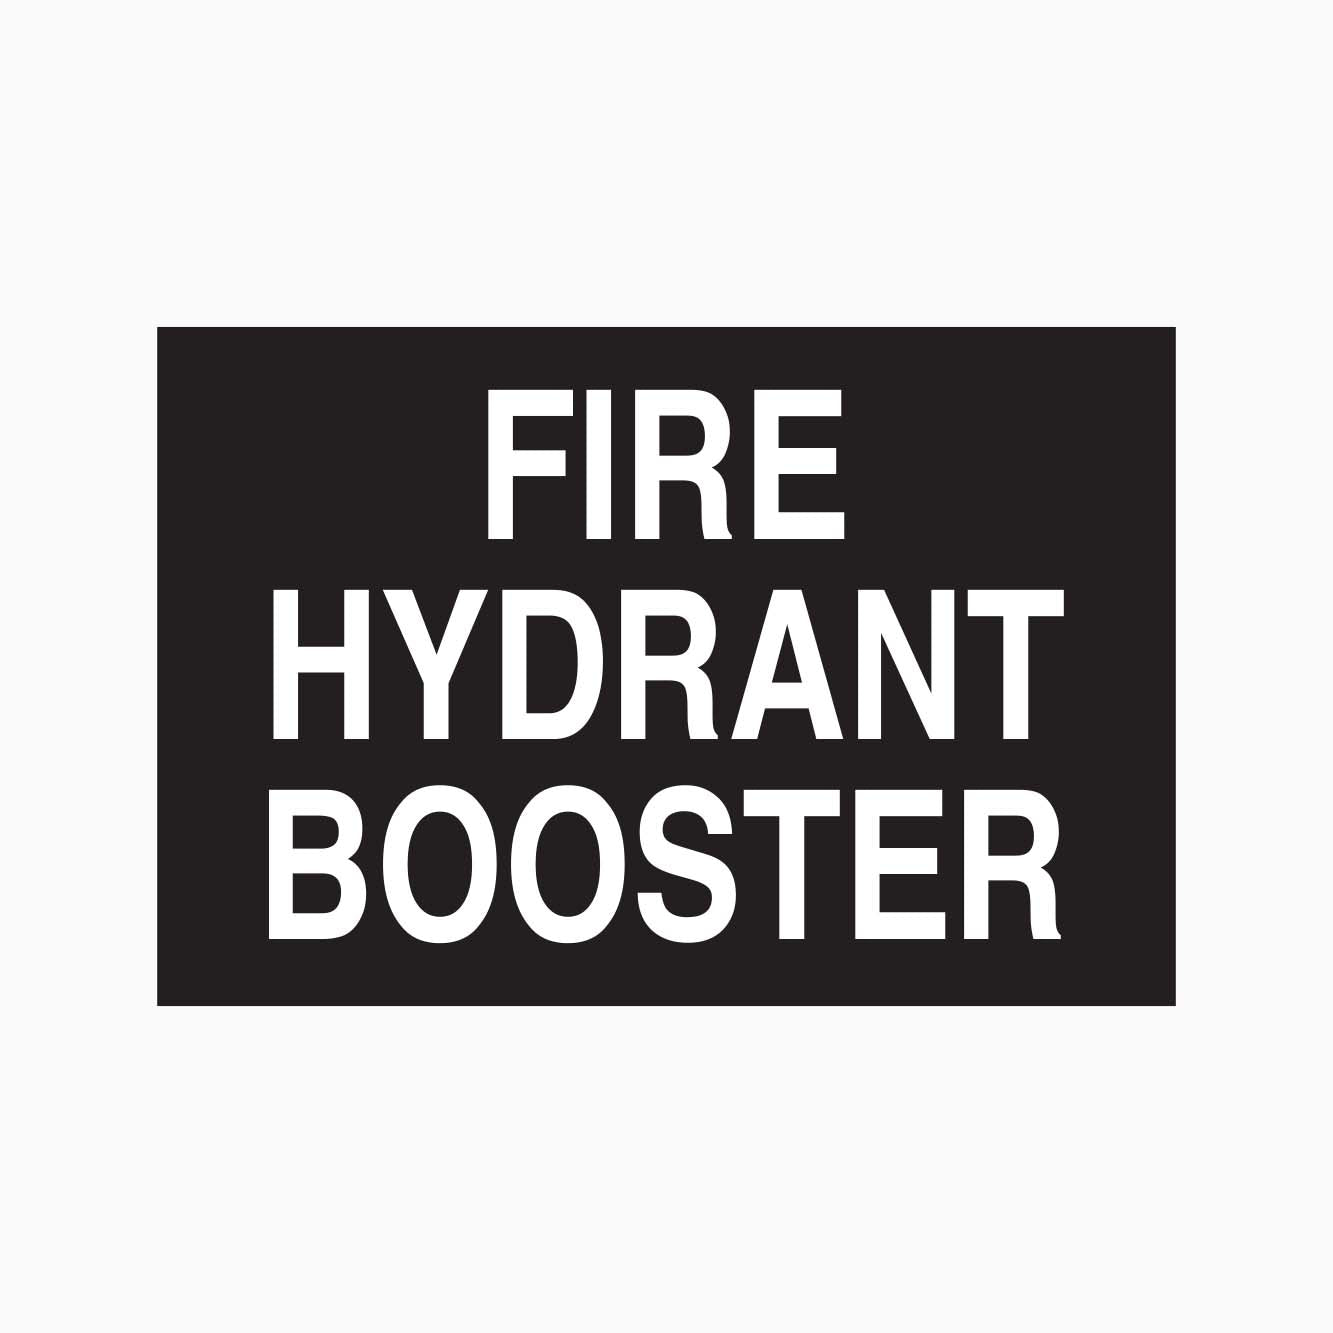 FIRE HYDRANT BOOSTER - STATUTORY SIGNS AT GET SIGNS